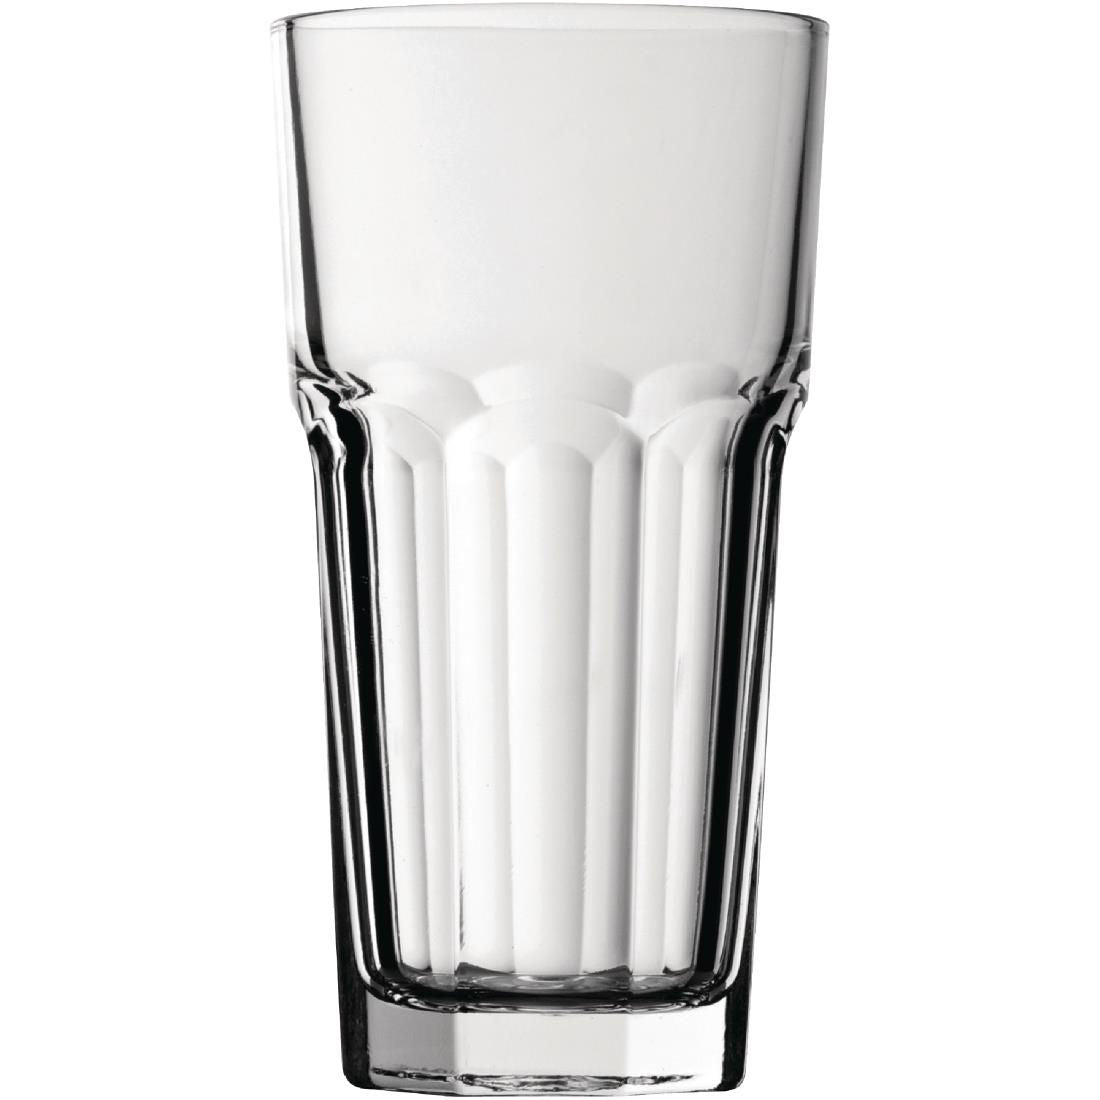 DL215 Utopia Casablanca Hi Ball Glasses 285ml CE Marked (Pack of 12) JD Catering Equipment Solutions Ltd